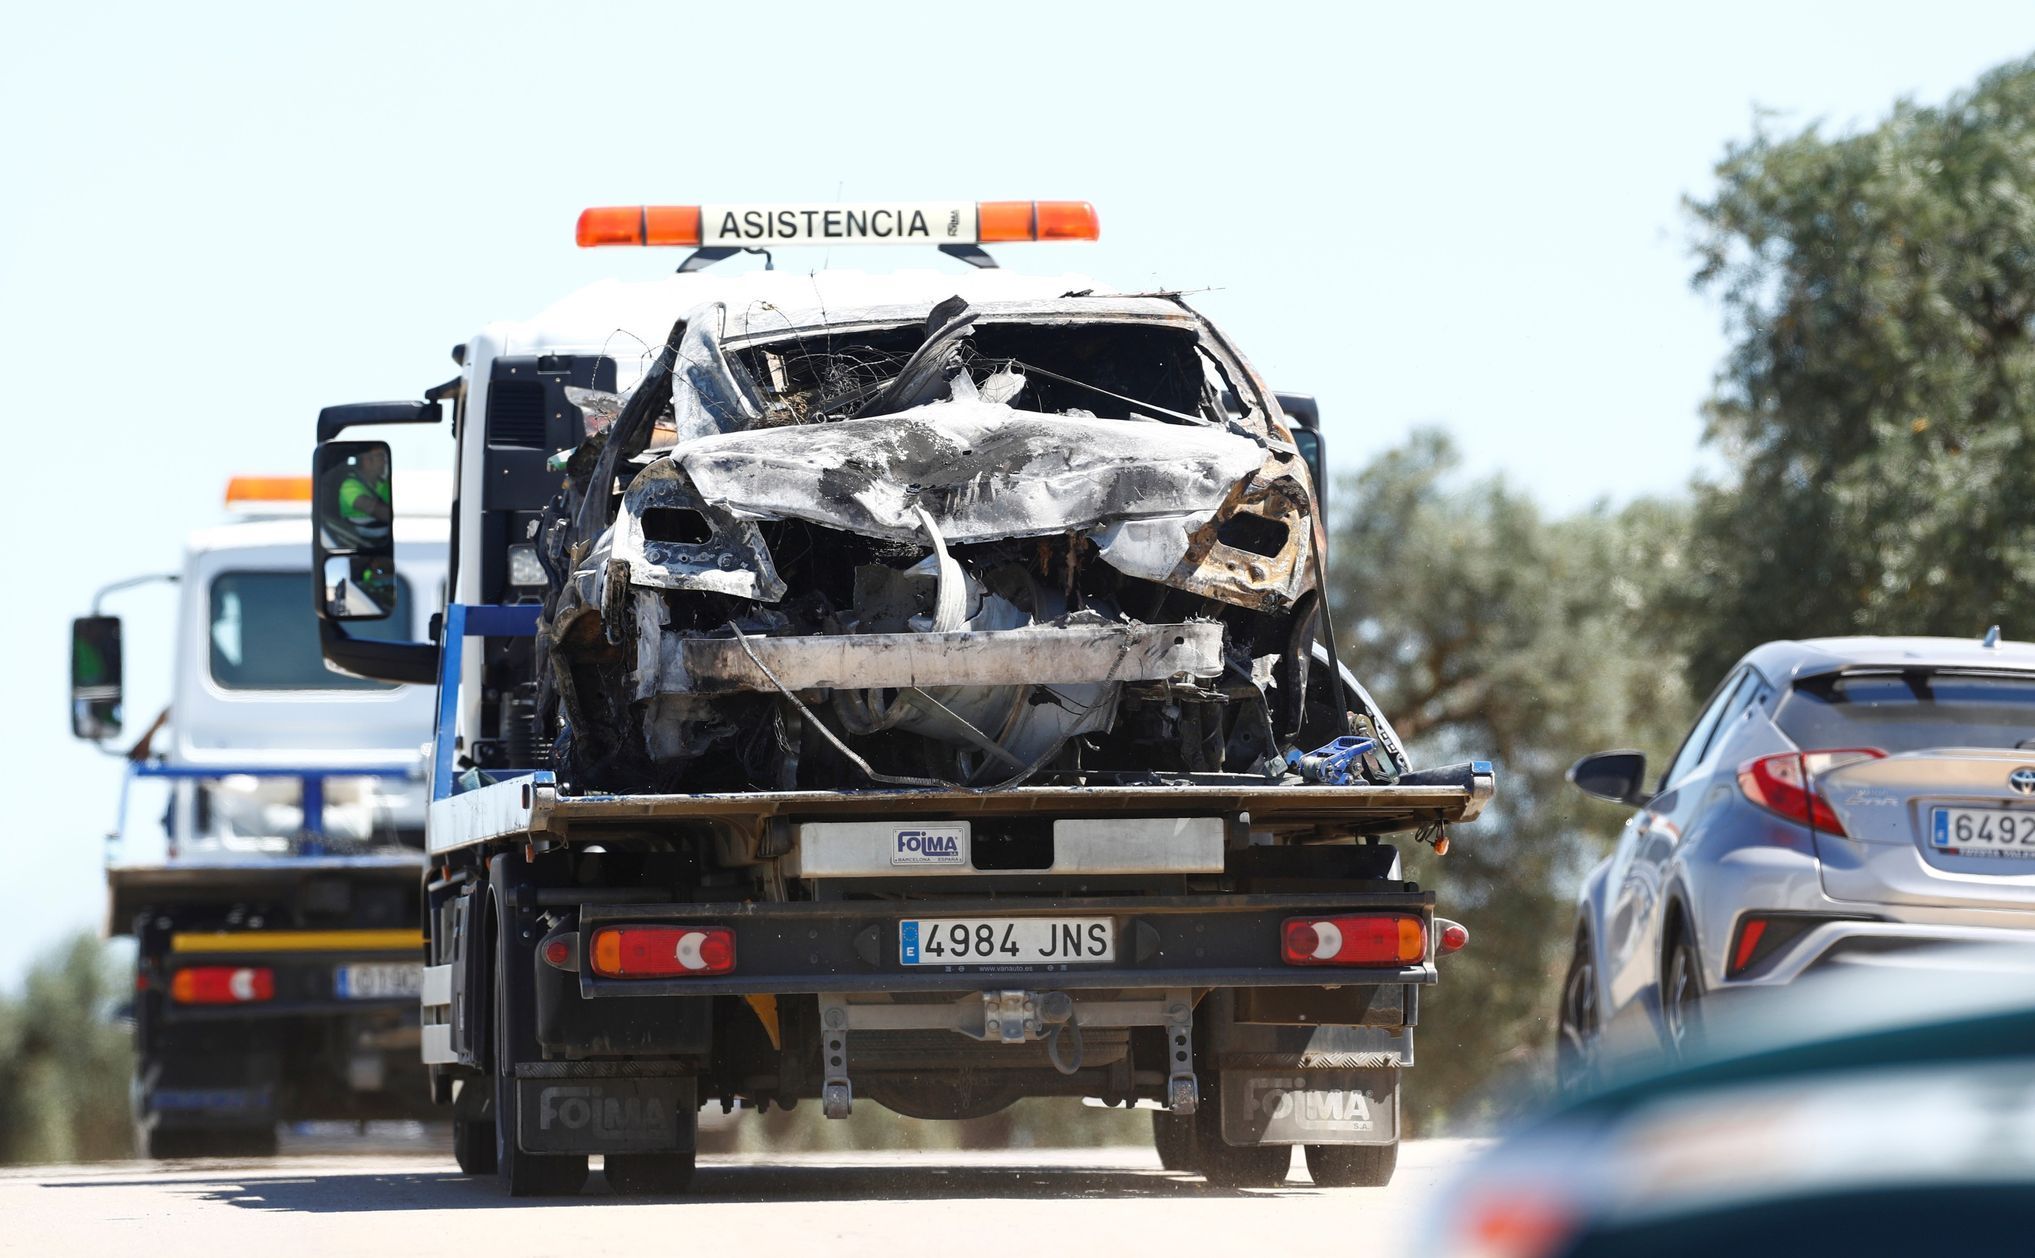 Wreckage removed from the crash site where the Spanish footballer Jose Antonio Reyes died in a traffic accident, is seen placed on a truck in Utrera